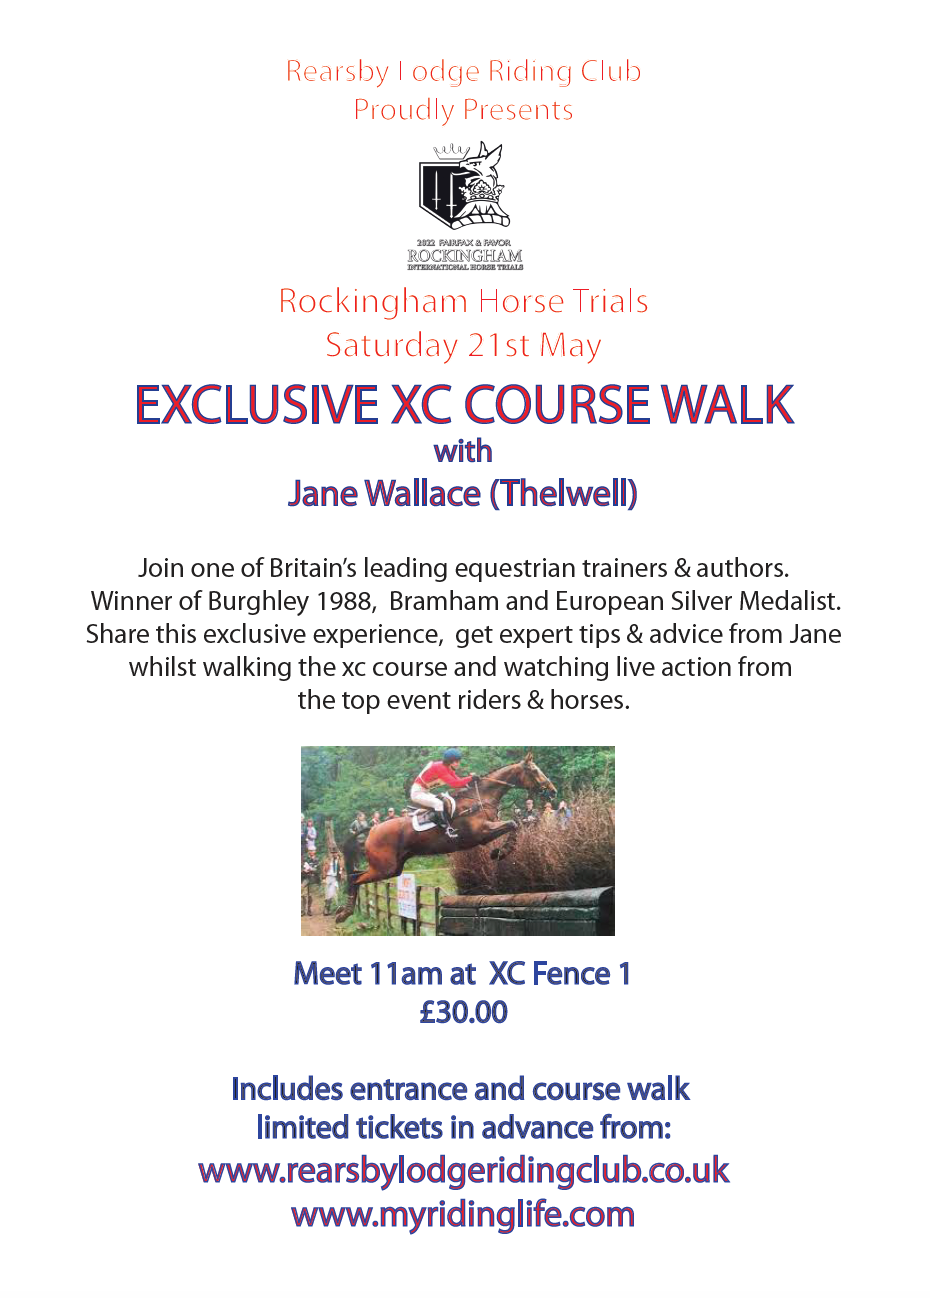 Jane Wallace Event